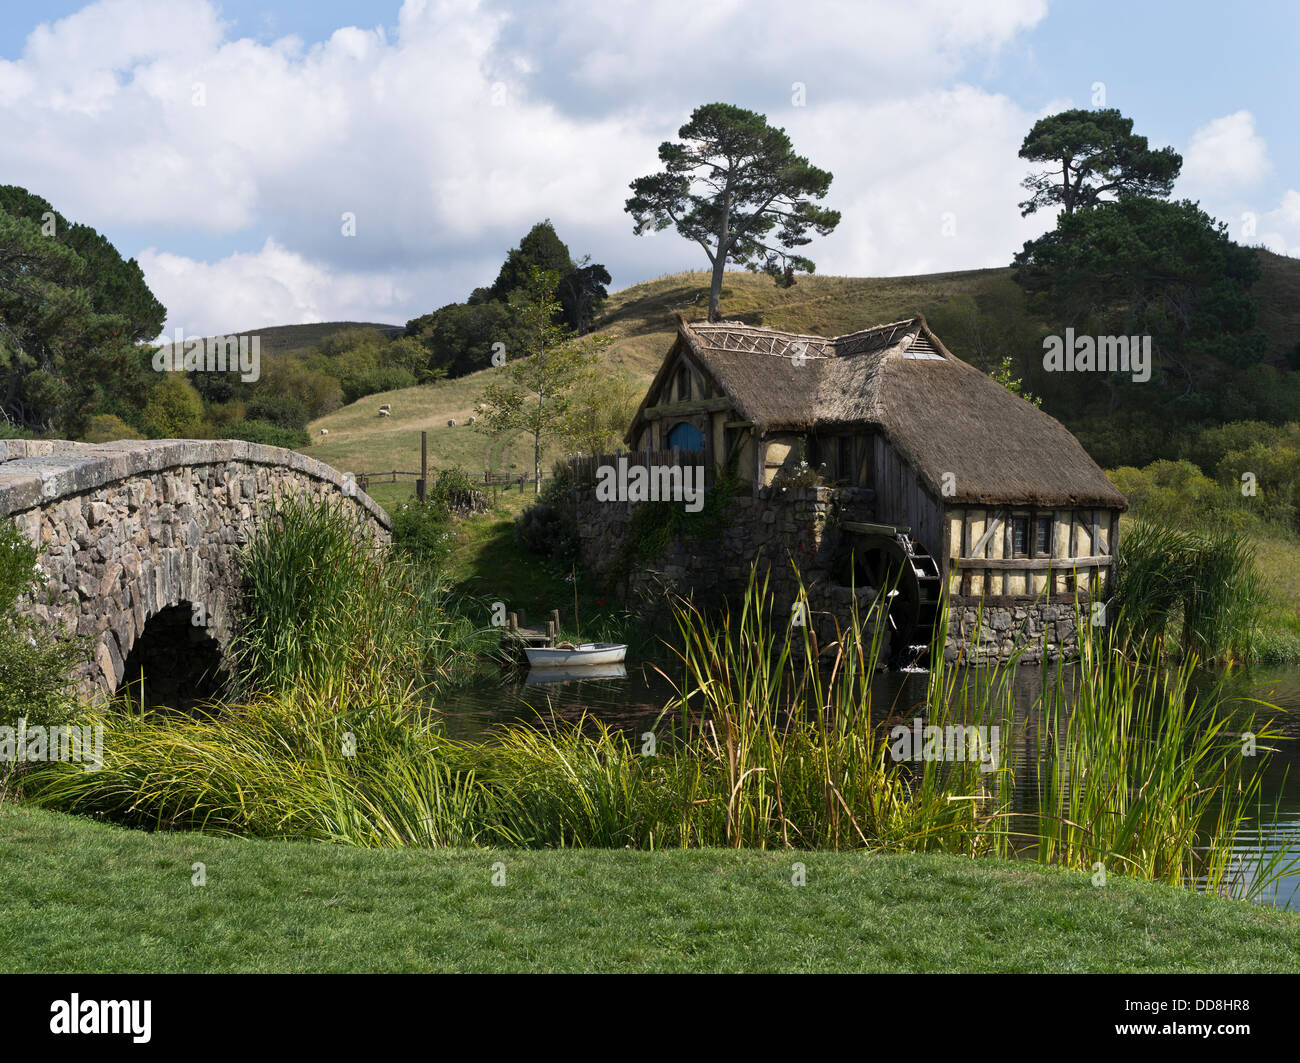 dh Lord of the Rings HOBBITON NEW ZEALAND Hobbits mill and bridge film set movie site films hobbit tolkien Stock Photo